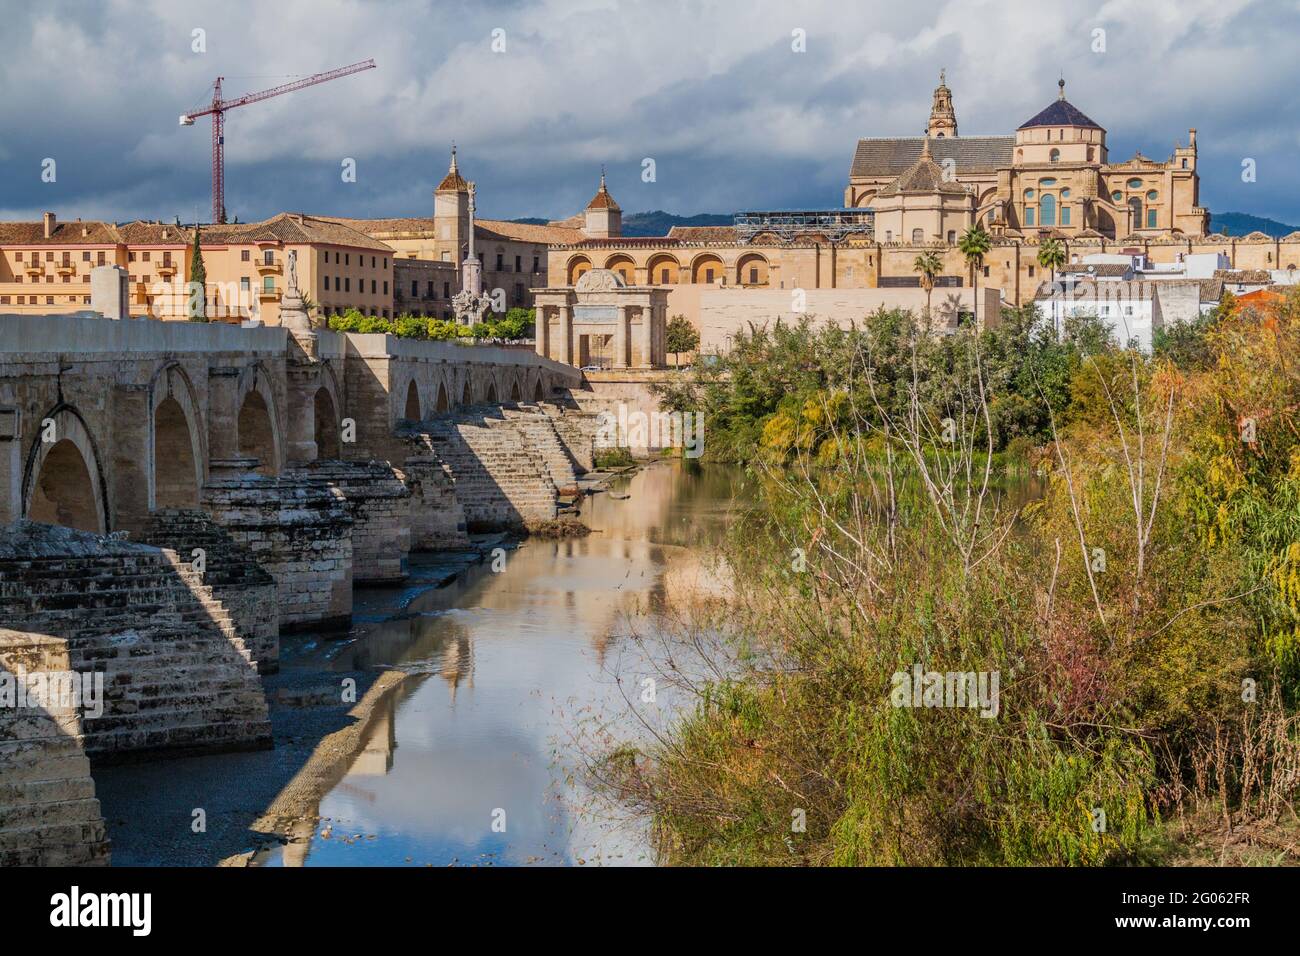 Mosque-Cathedral and Roman Bridge in Cordoba, Spain Stock Photo